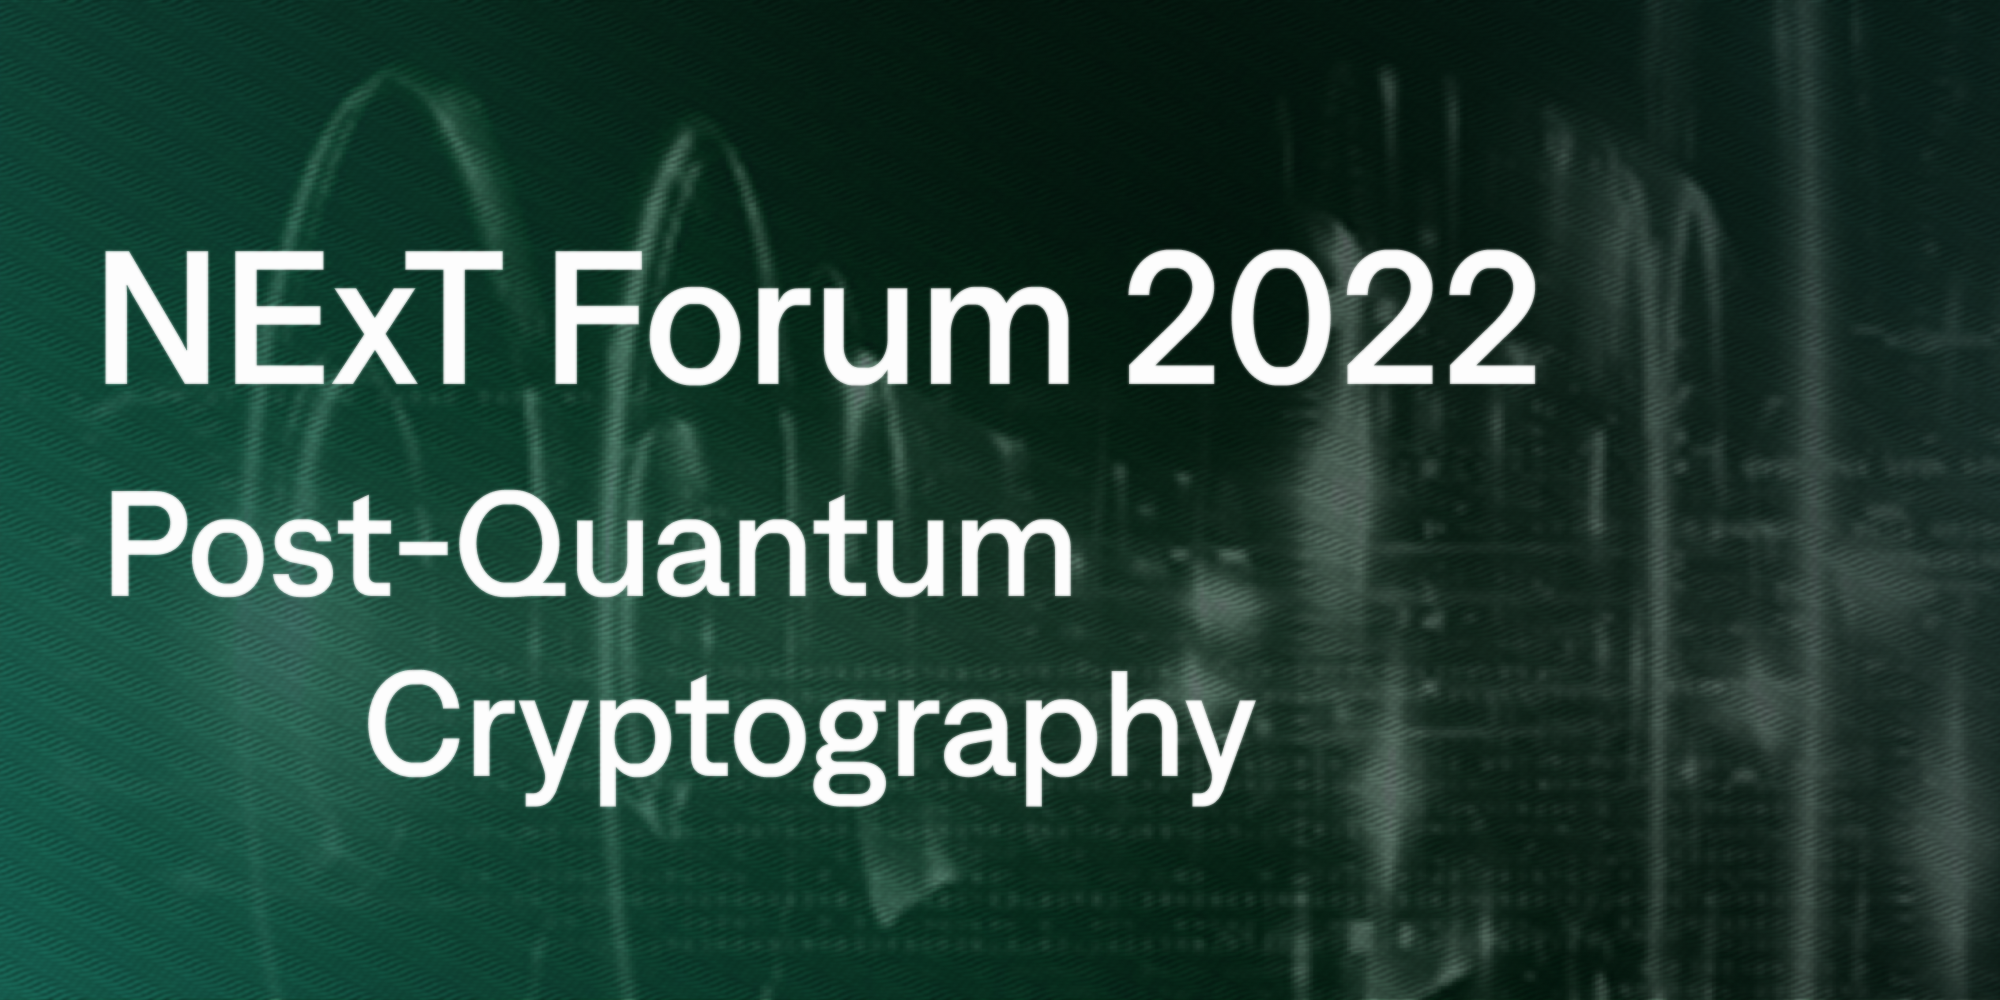 NExT Forum 2022: A Tutorial on Post-Quantum Cryptography